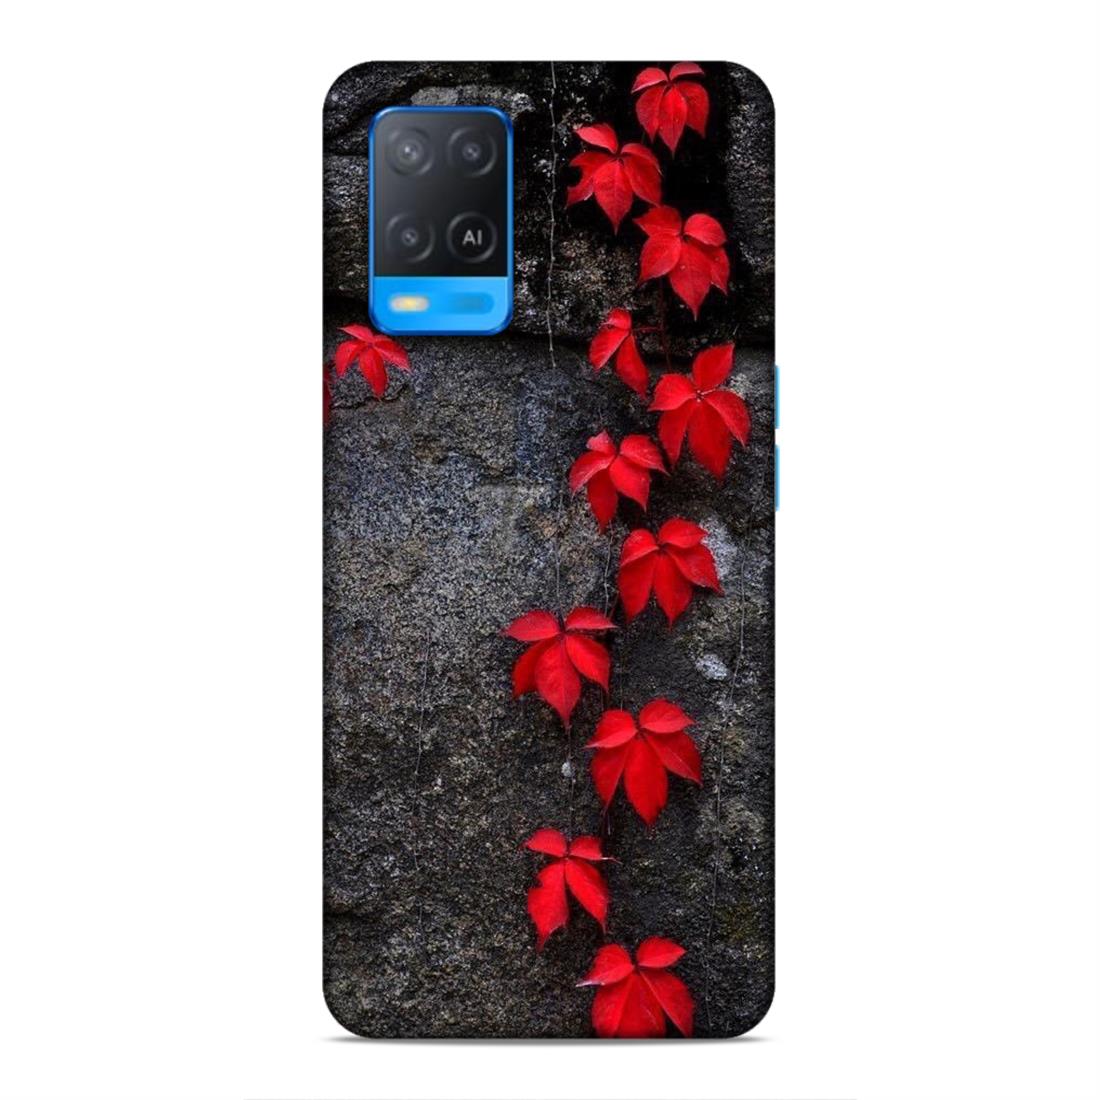 Red Leaf Series Hard Back Case For Oppo A54 4G